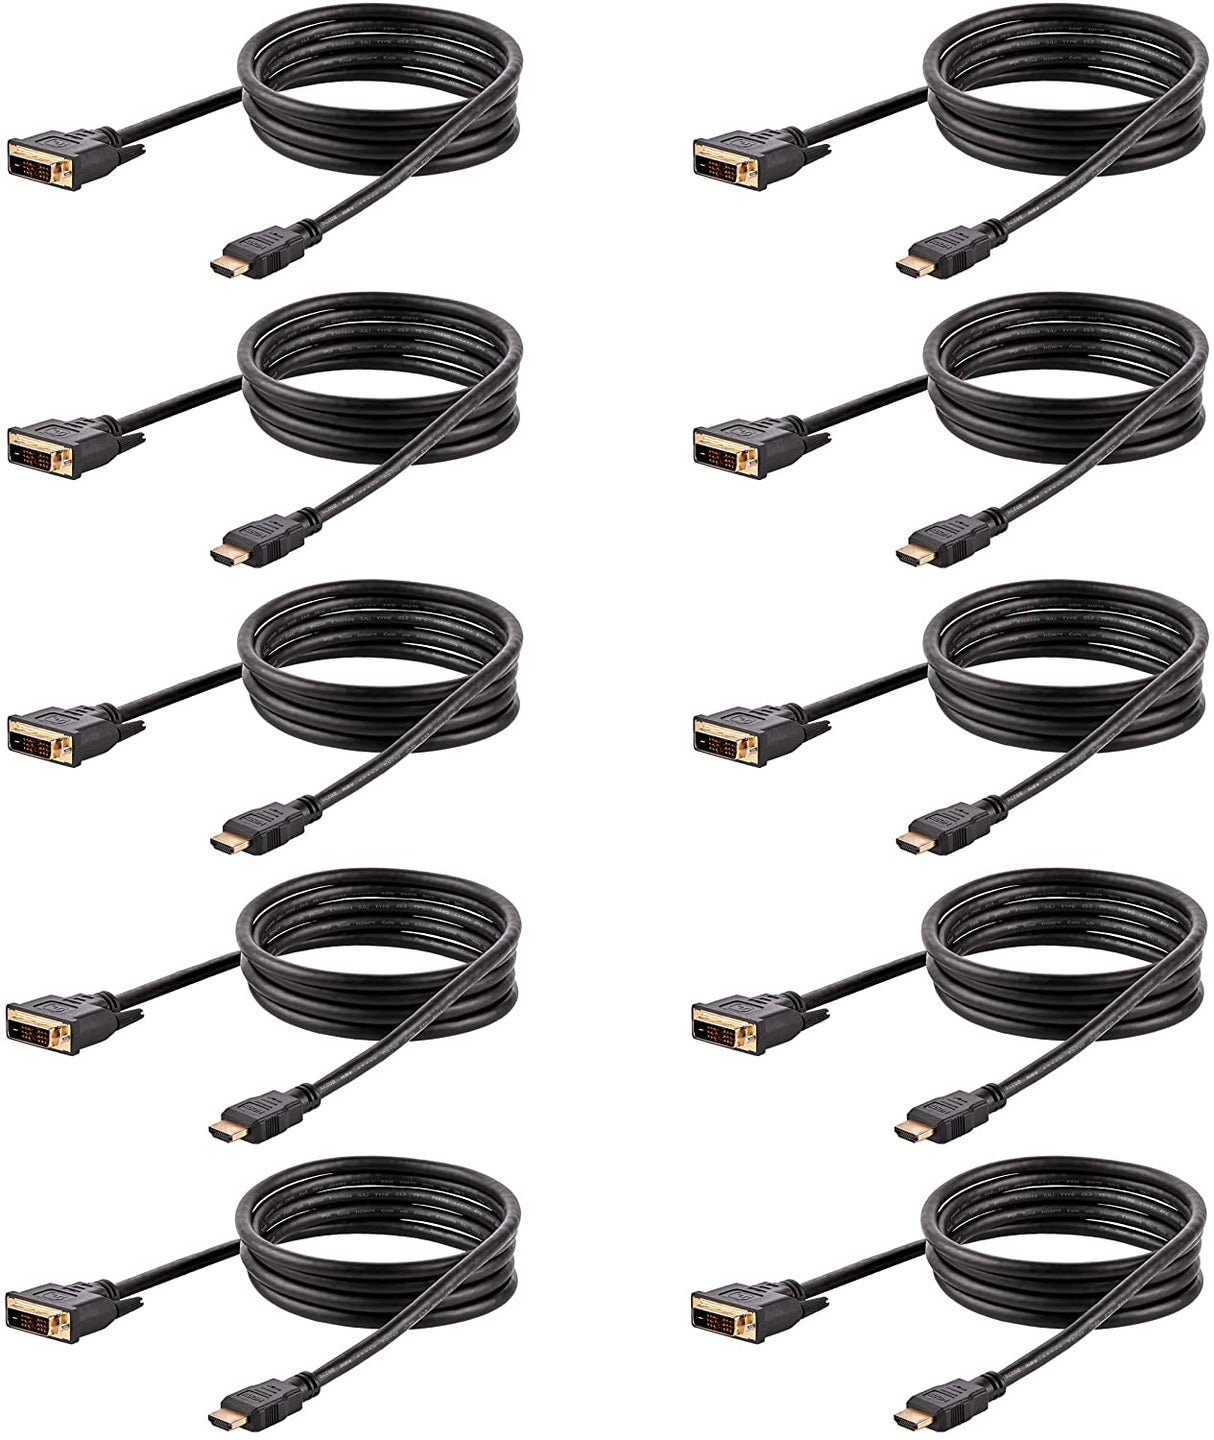 StarTech.com 6ft (1.8m) HDMI to DVI Cable, DVI-D to HDMI Display Cable (1920x1200p), 10 Pack, Black, 19 Pin HDMI to DVI-D Cable Adapter M/M, Digital Monitor Cable, DVI to HDMI Cord (HDMIDVIMM610PK) 6 ft / 2 m 10 pack